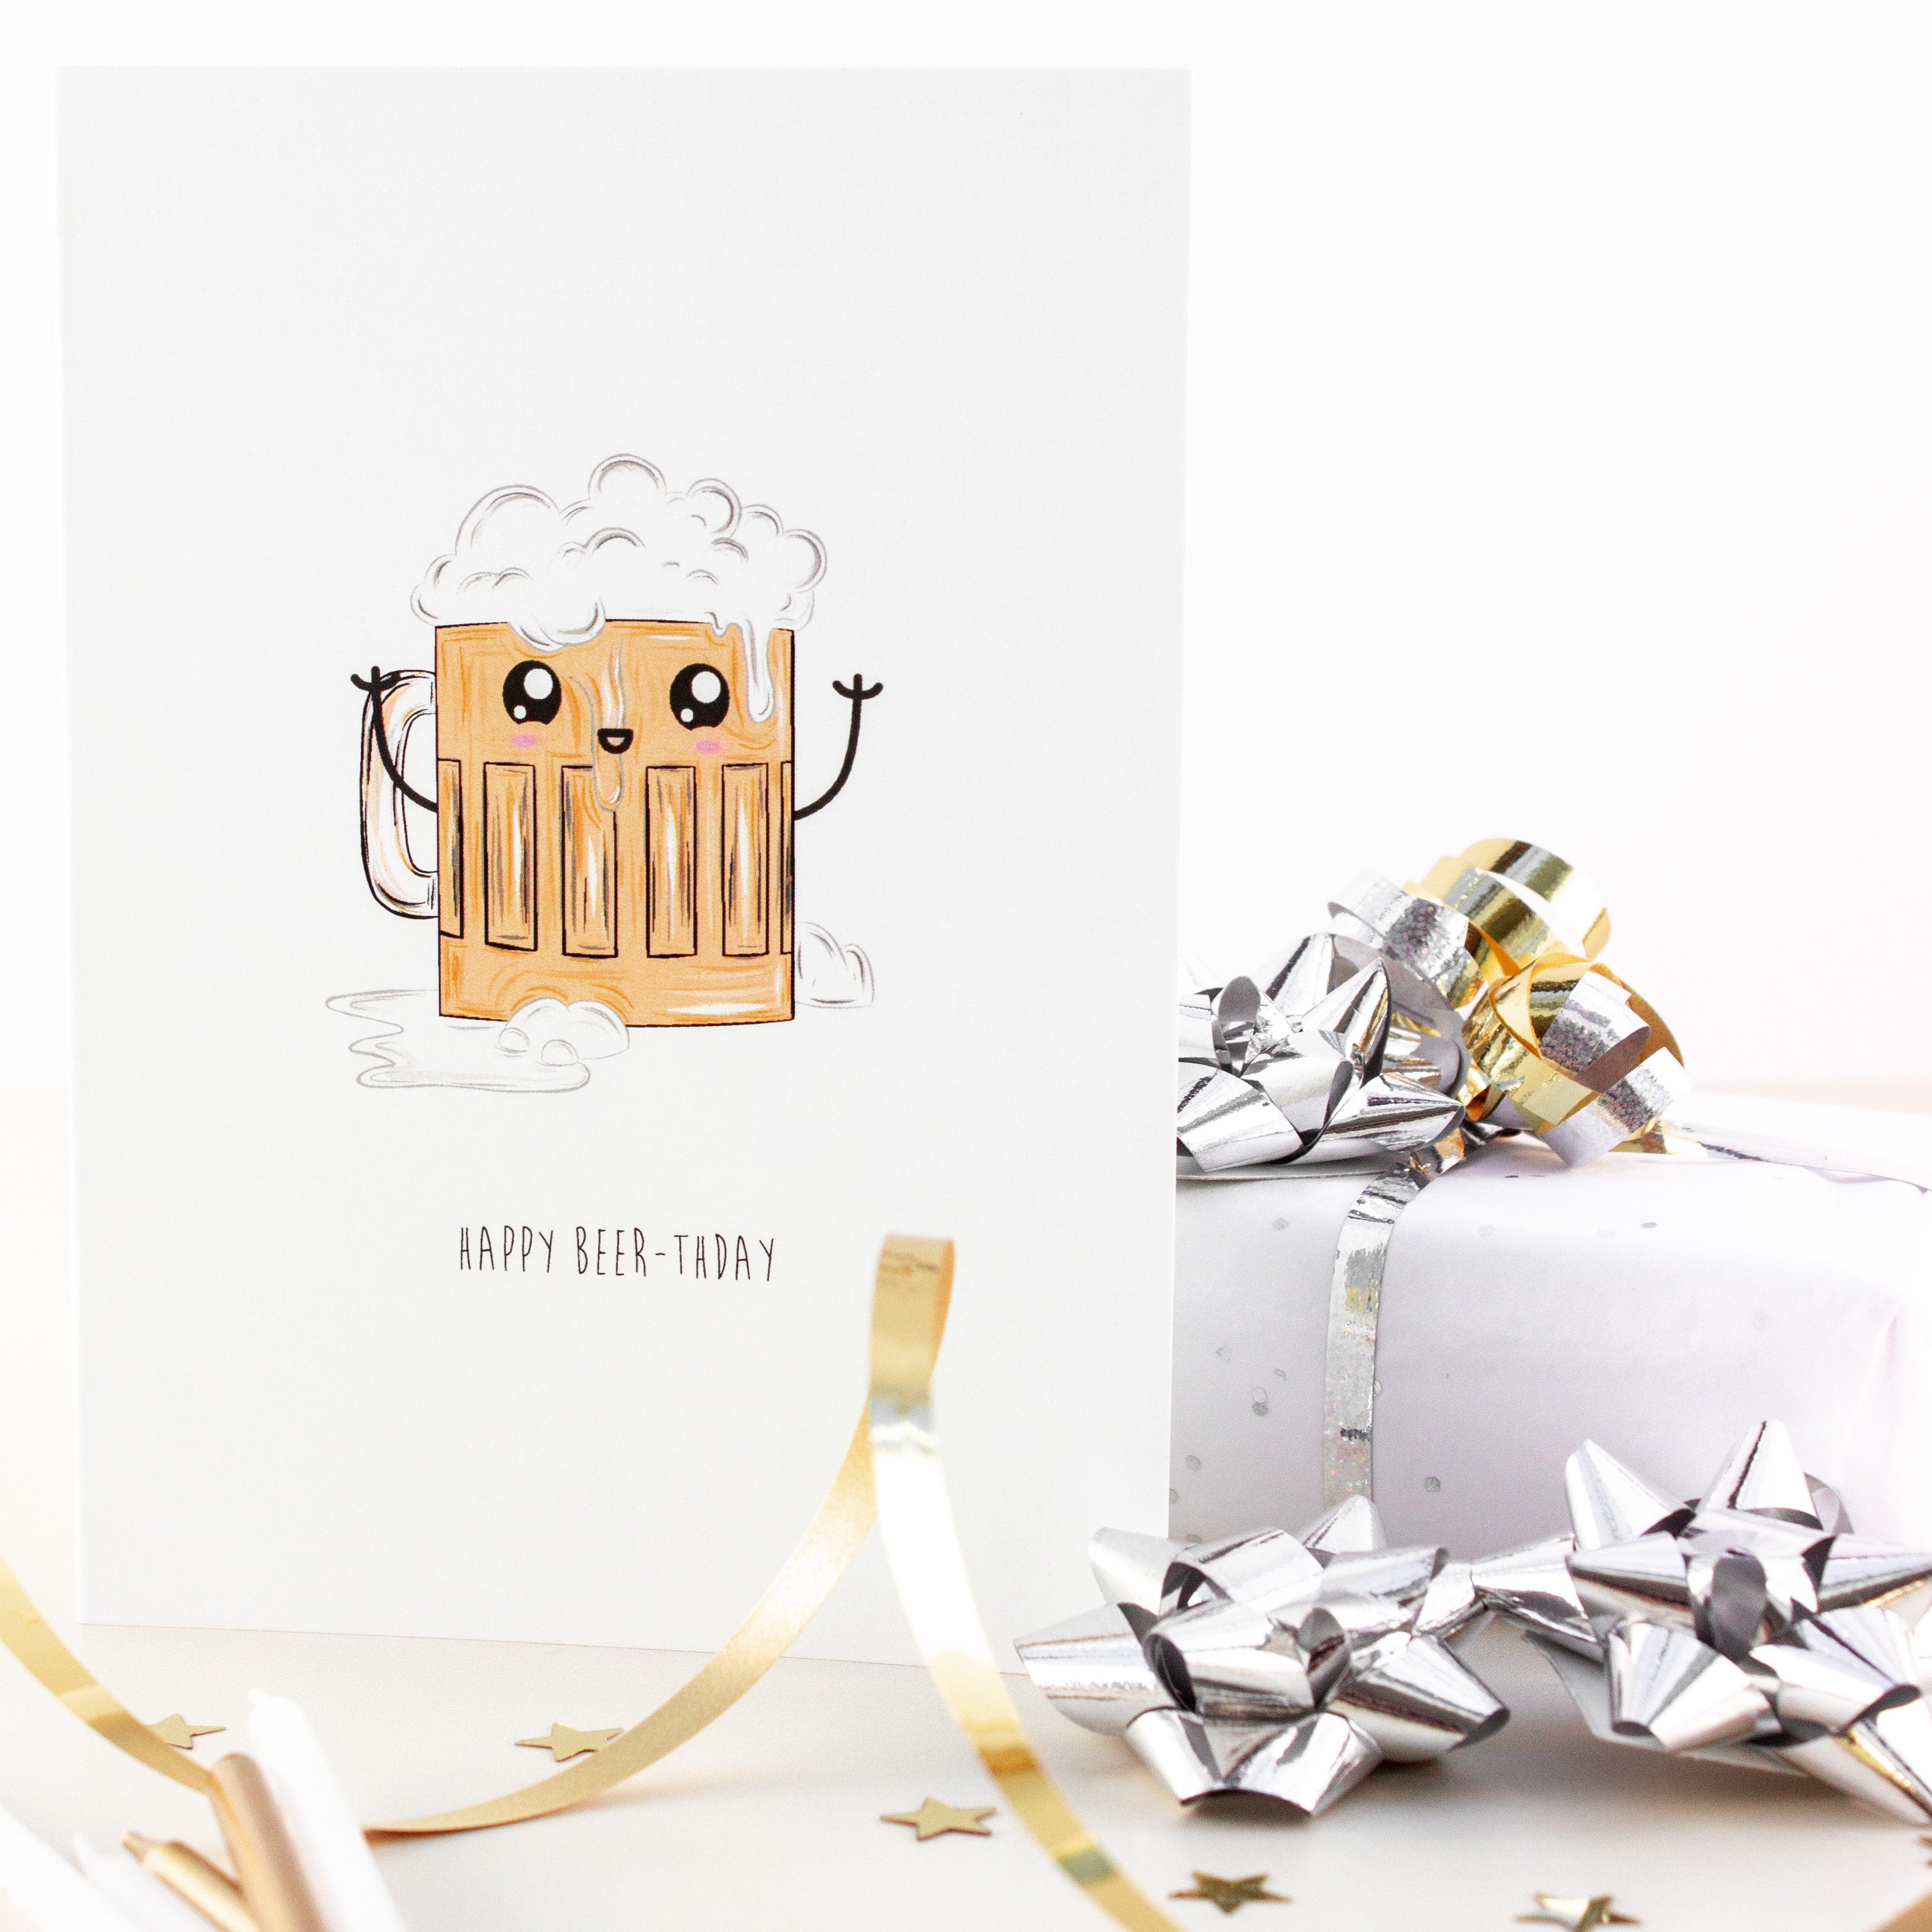 Quirky greeting card with an illustration of a beer mug filled to the top with beer and froth on top. The mug has a cartoon style face.